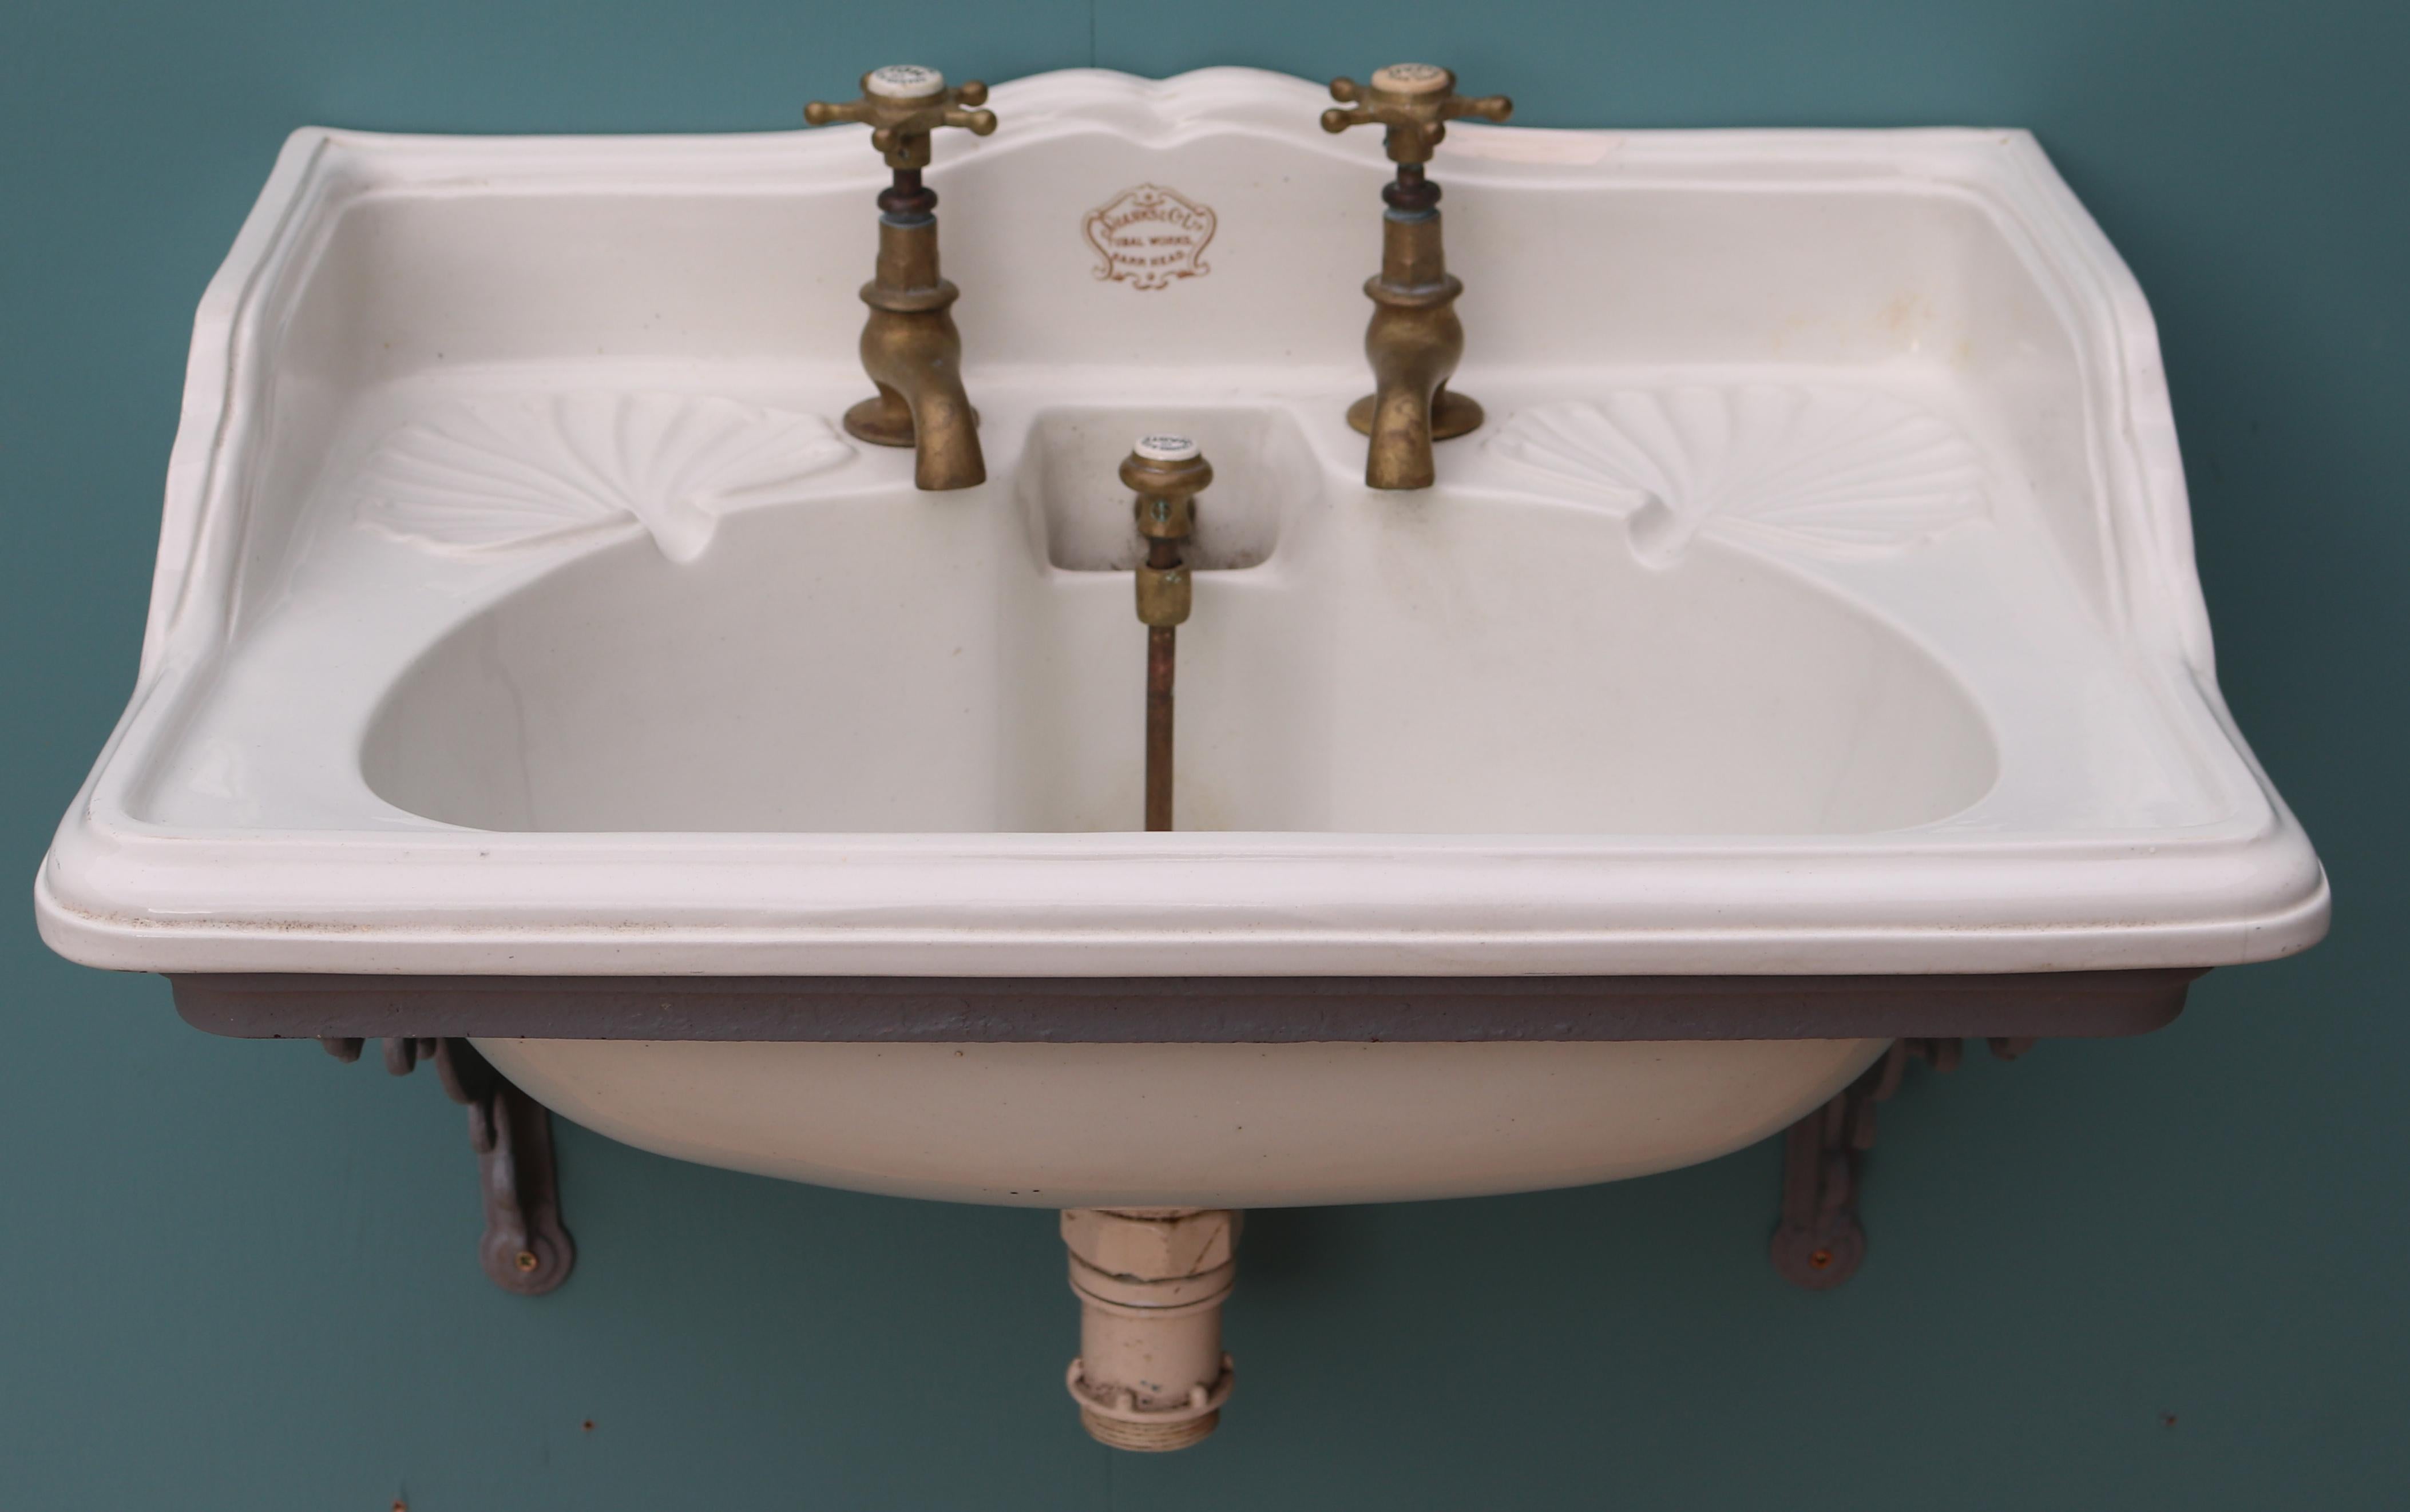 A Shanks plunger basin with original brass taps and waste. Sitting on a wall-mounted iron bracket, finished in grey primer.

Condition report:

Good structural condition. Small hairline crack in the bowl. This has been tested and does not leak.